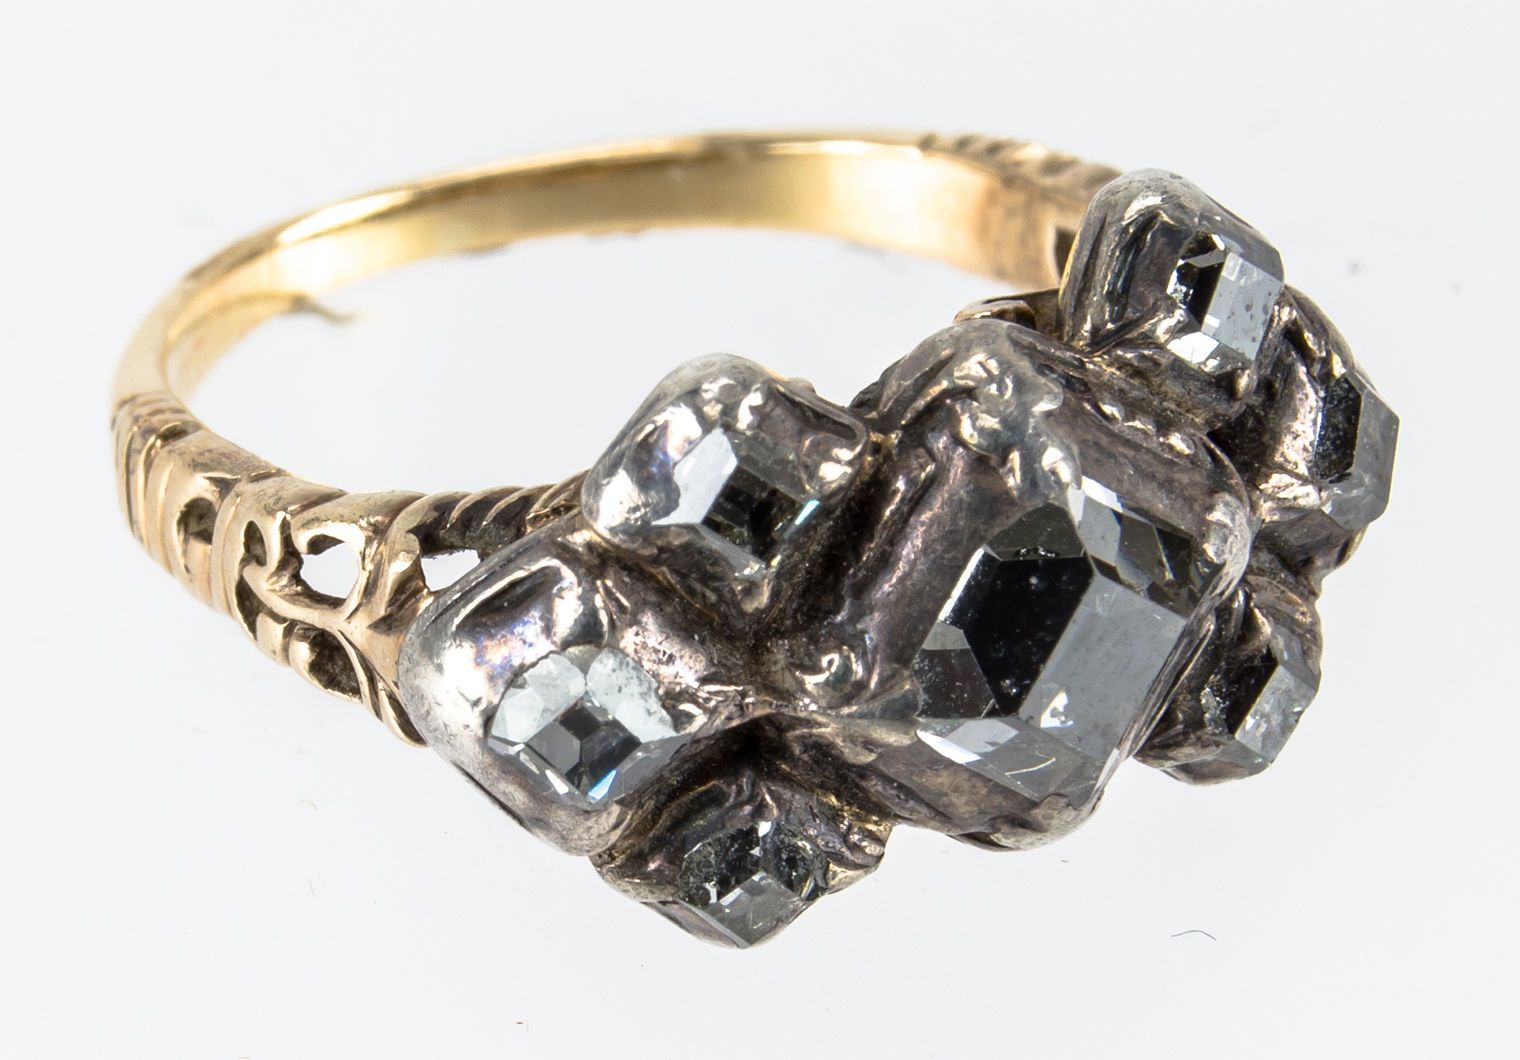 Ring with seven table-cut diamonds, 17th century. Benjamin Zucker Family Collection.